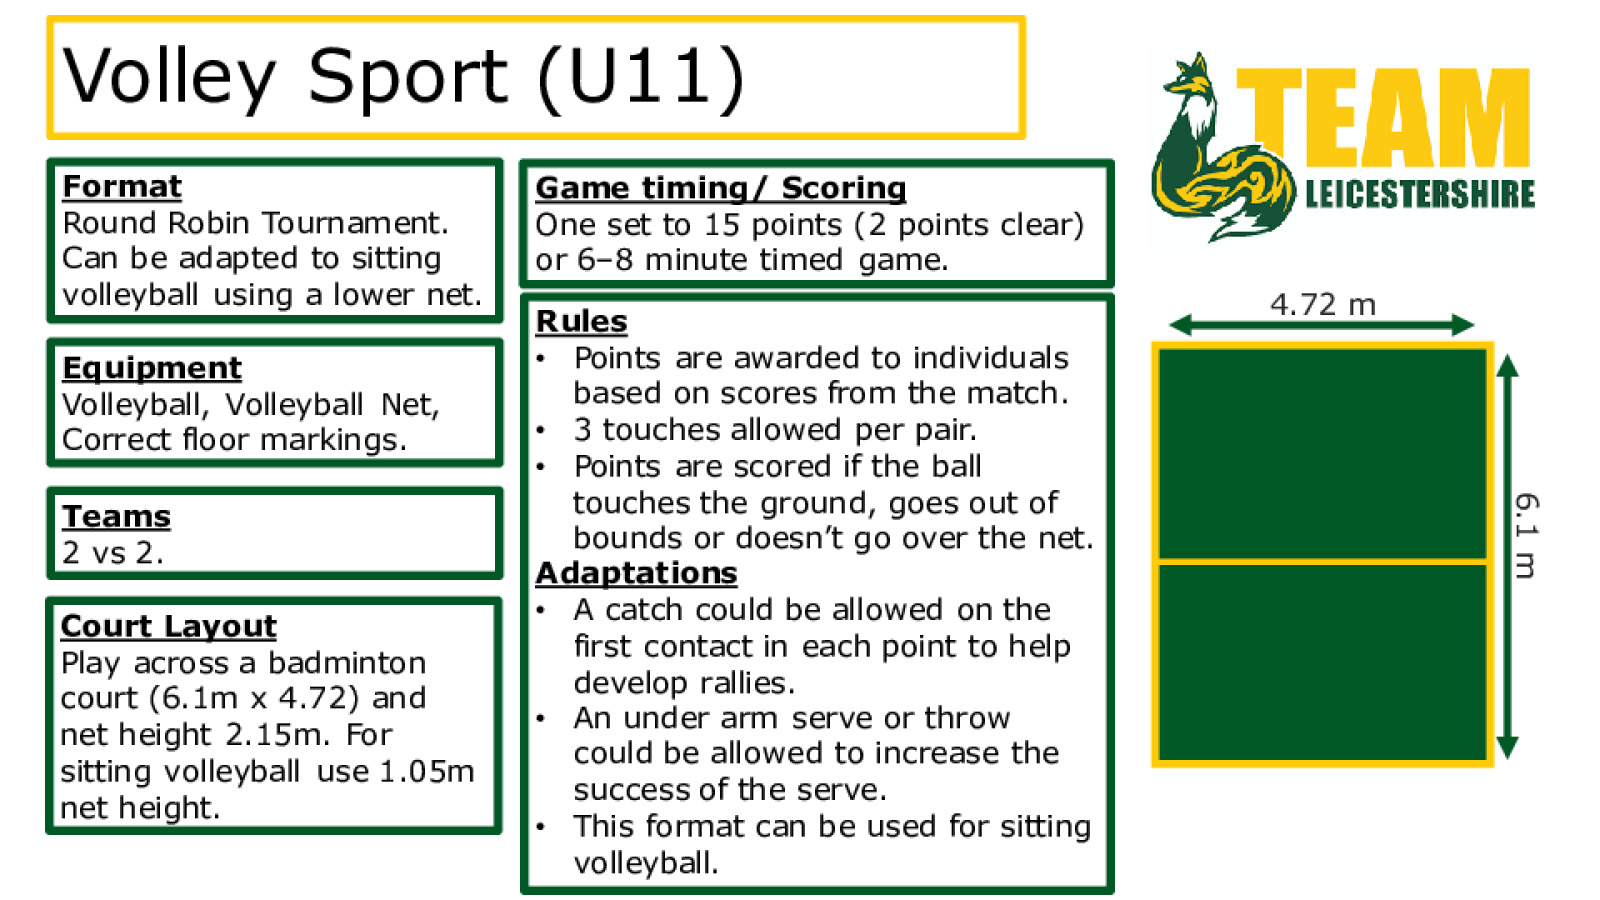 Volleyball - Sitting Volleyball Format